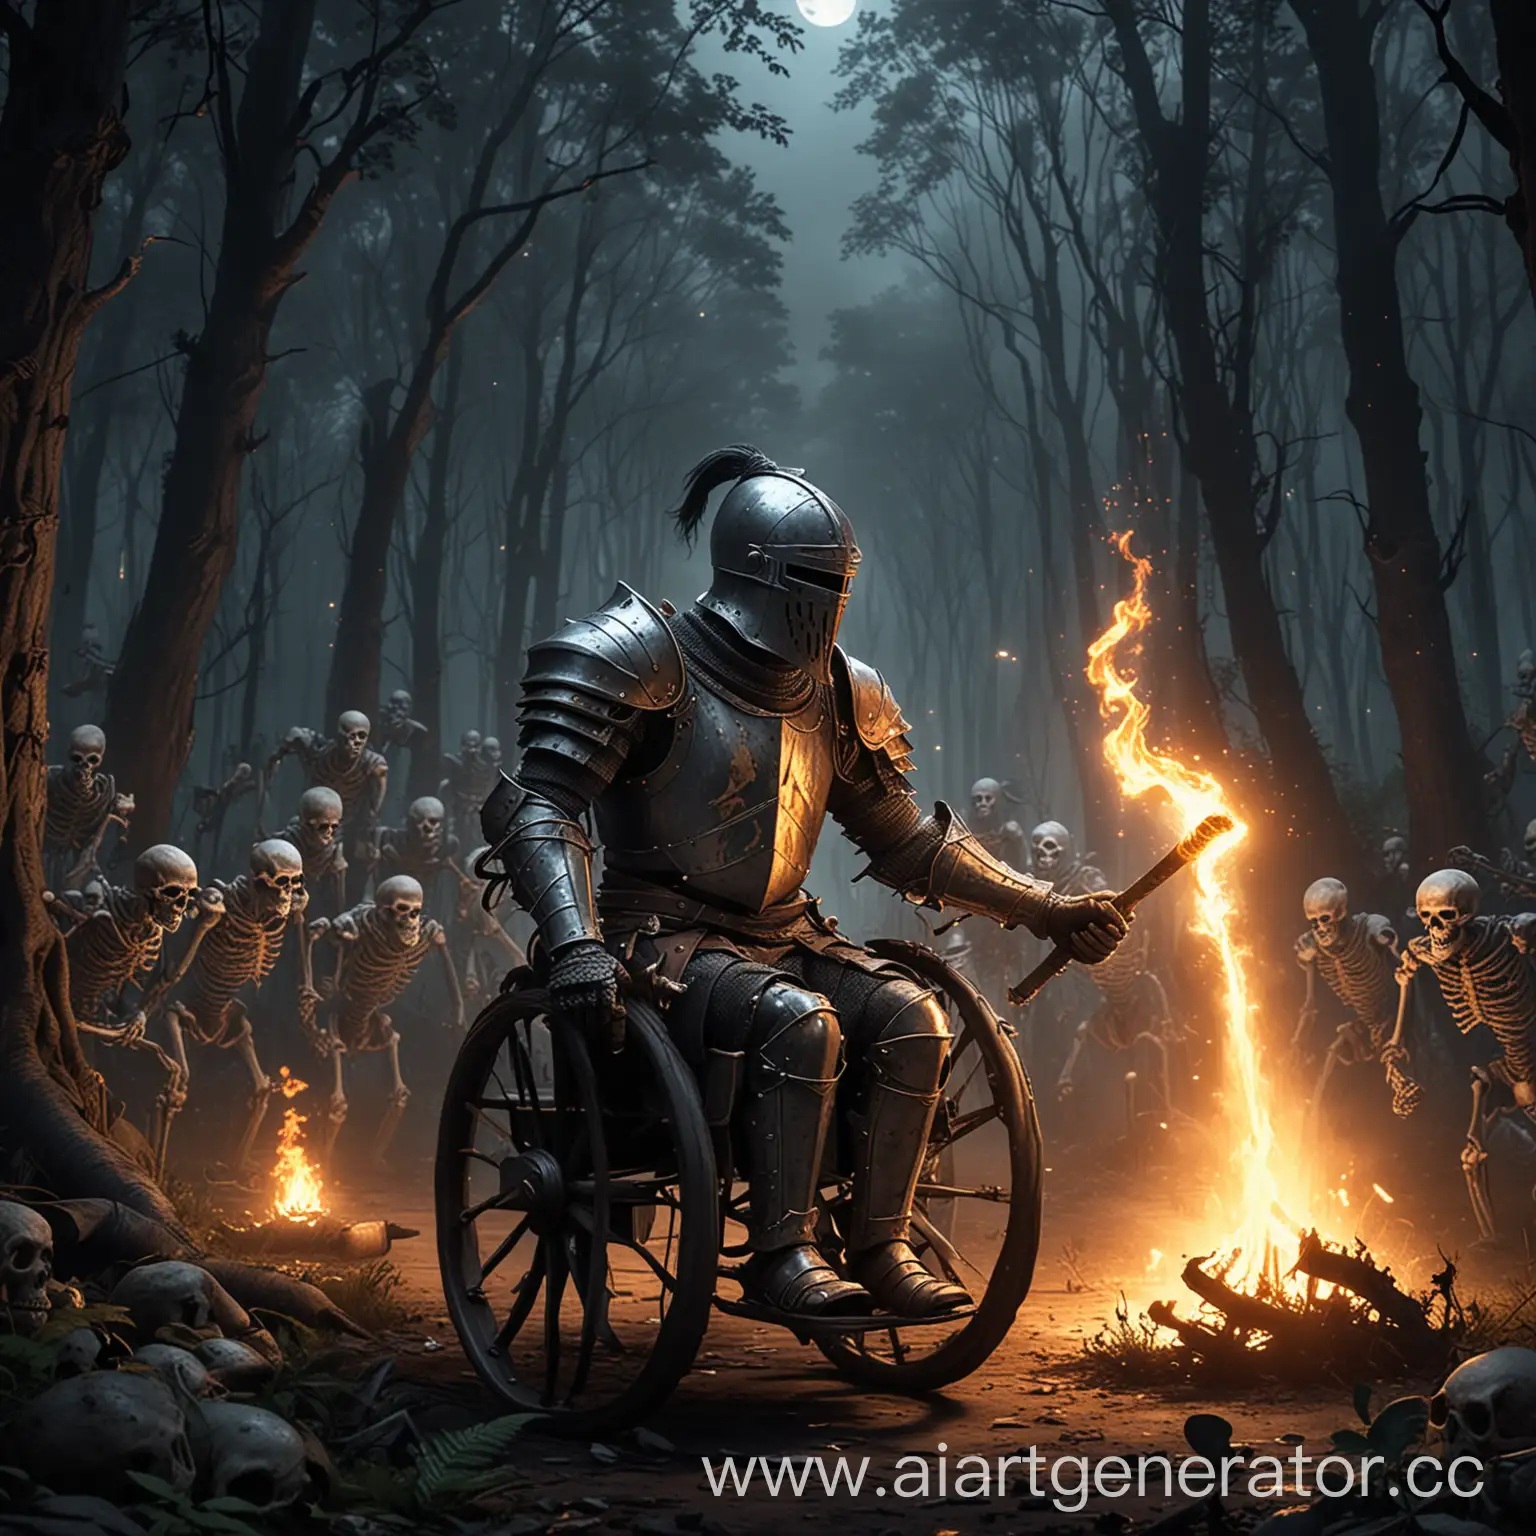 Cartoony image of a knight with torch on wheelchair fighting a skeletons in dark forrest